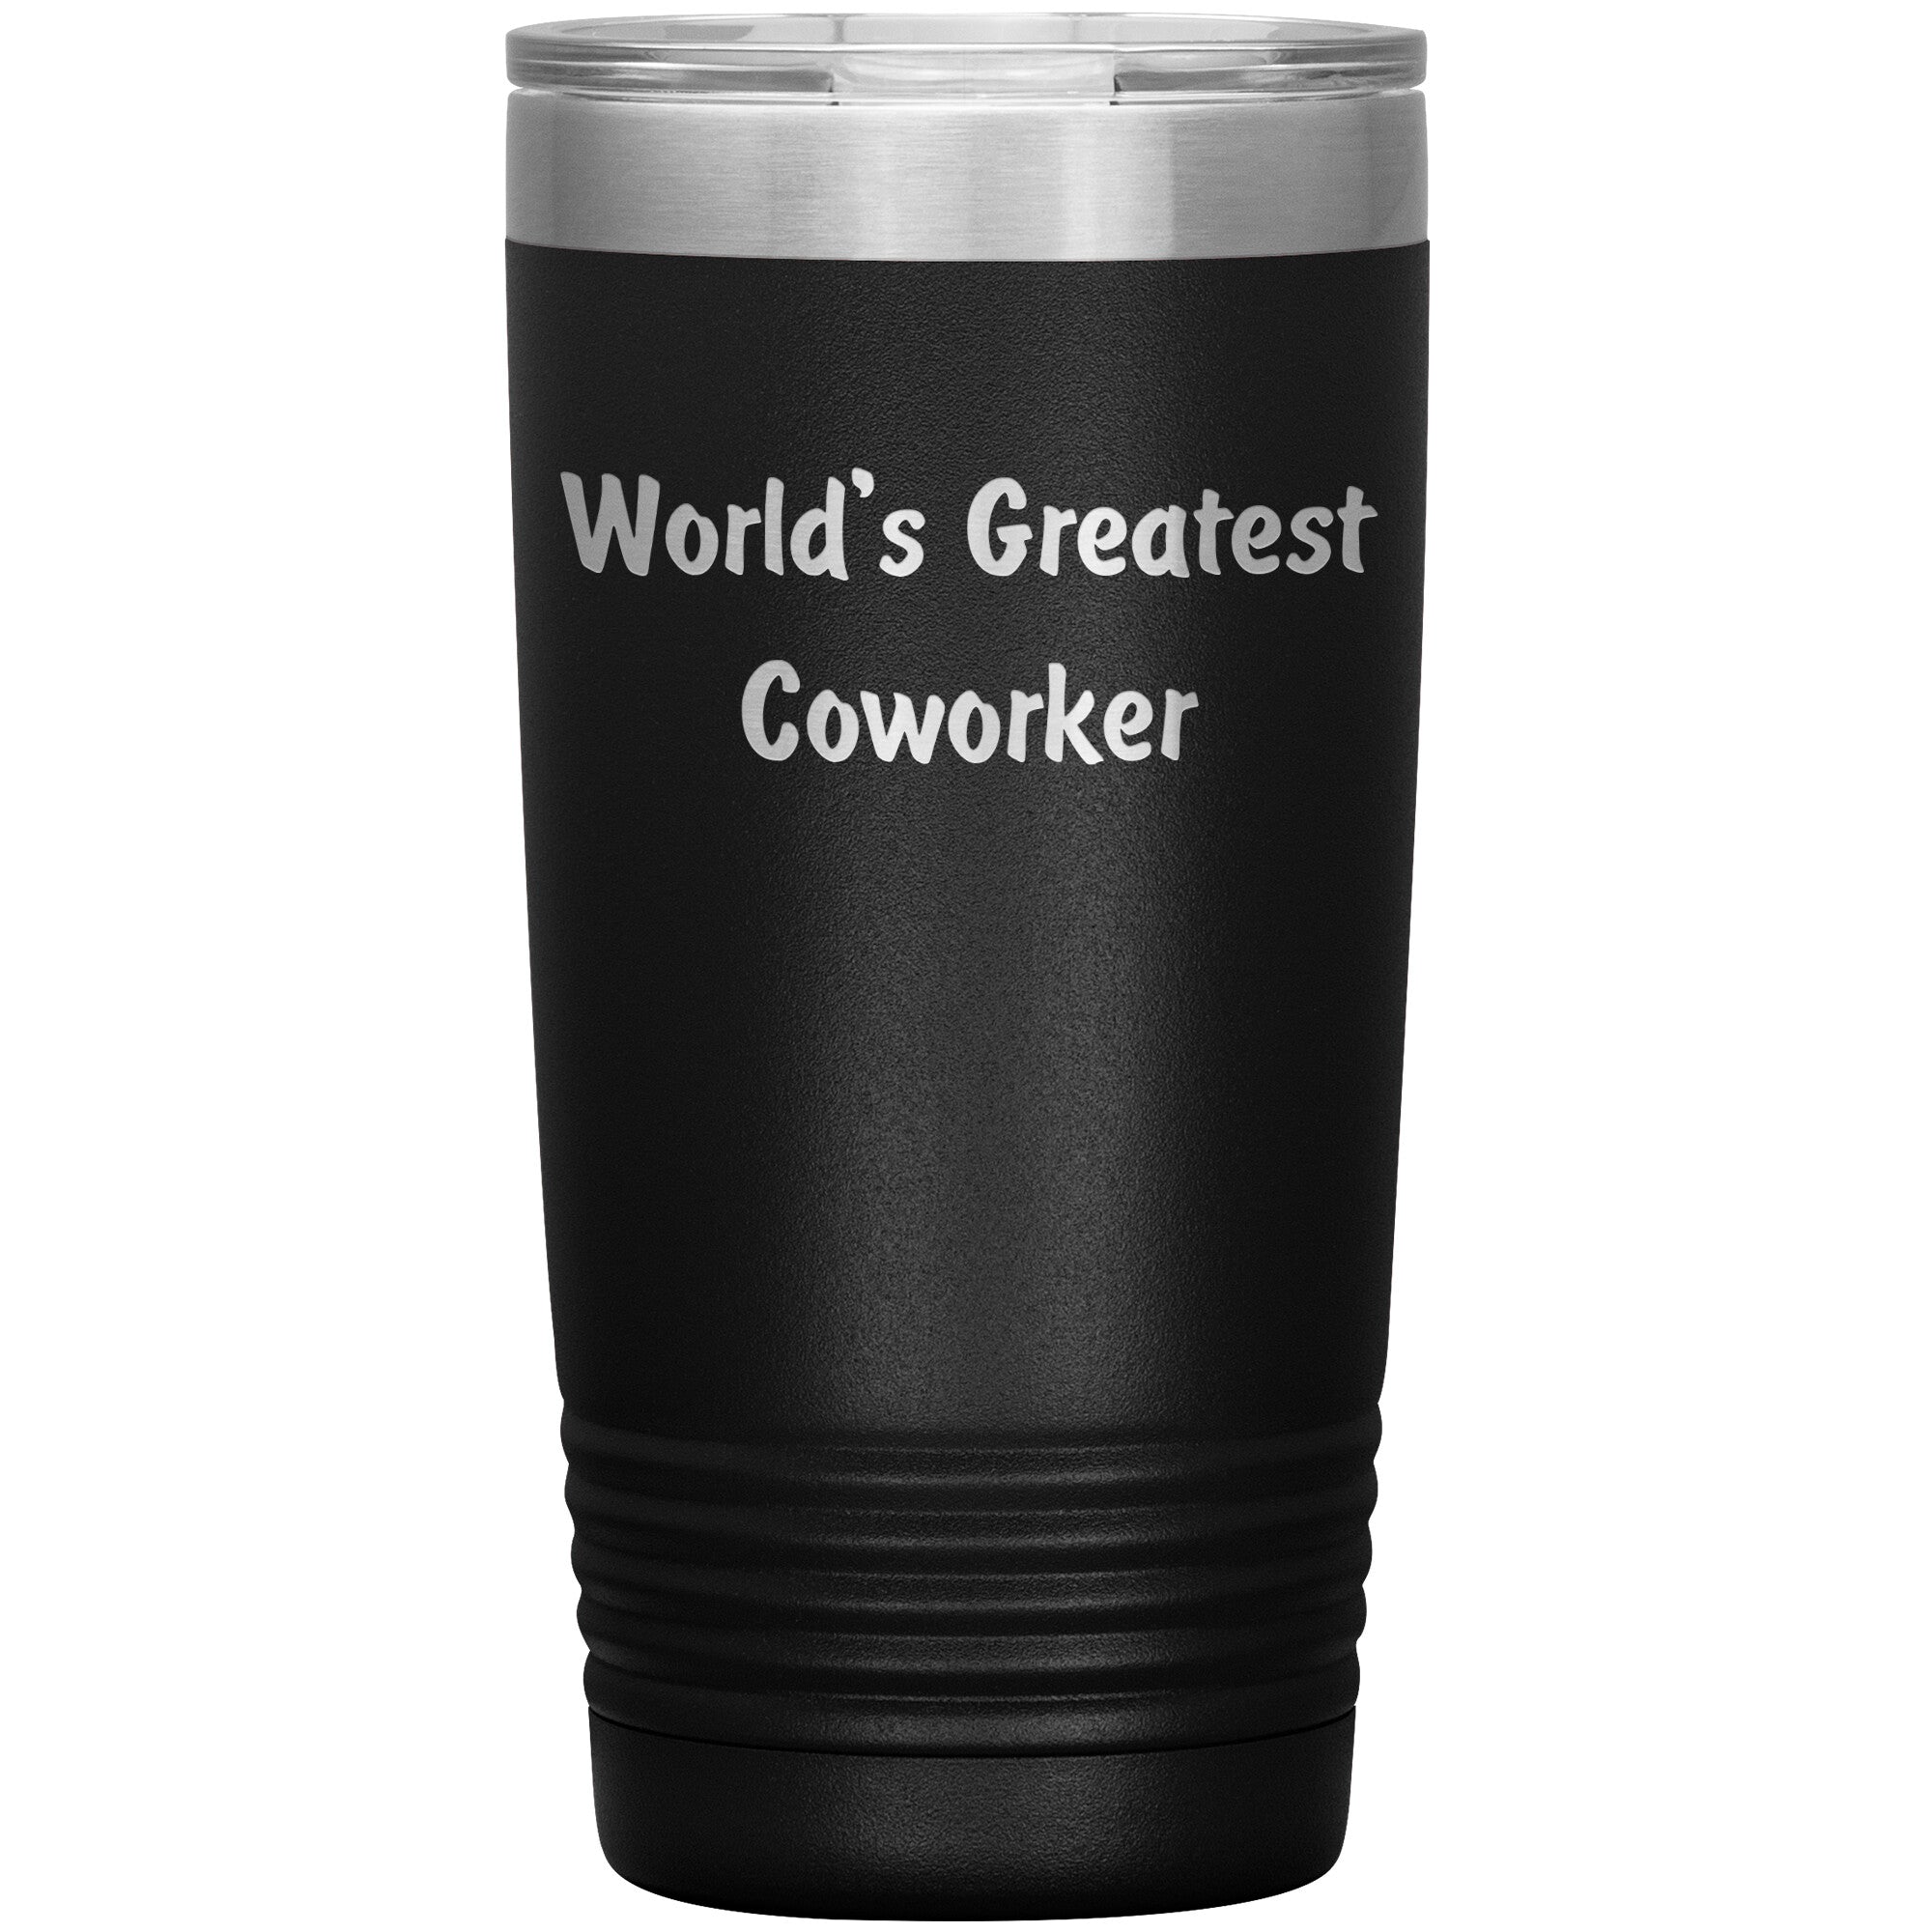 World's Greatest Coworker - 20oz Insulated Tumbler